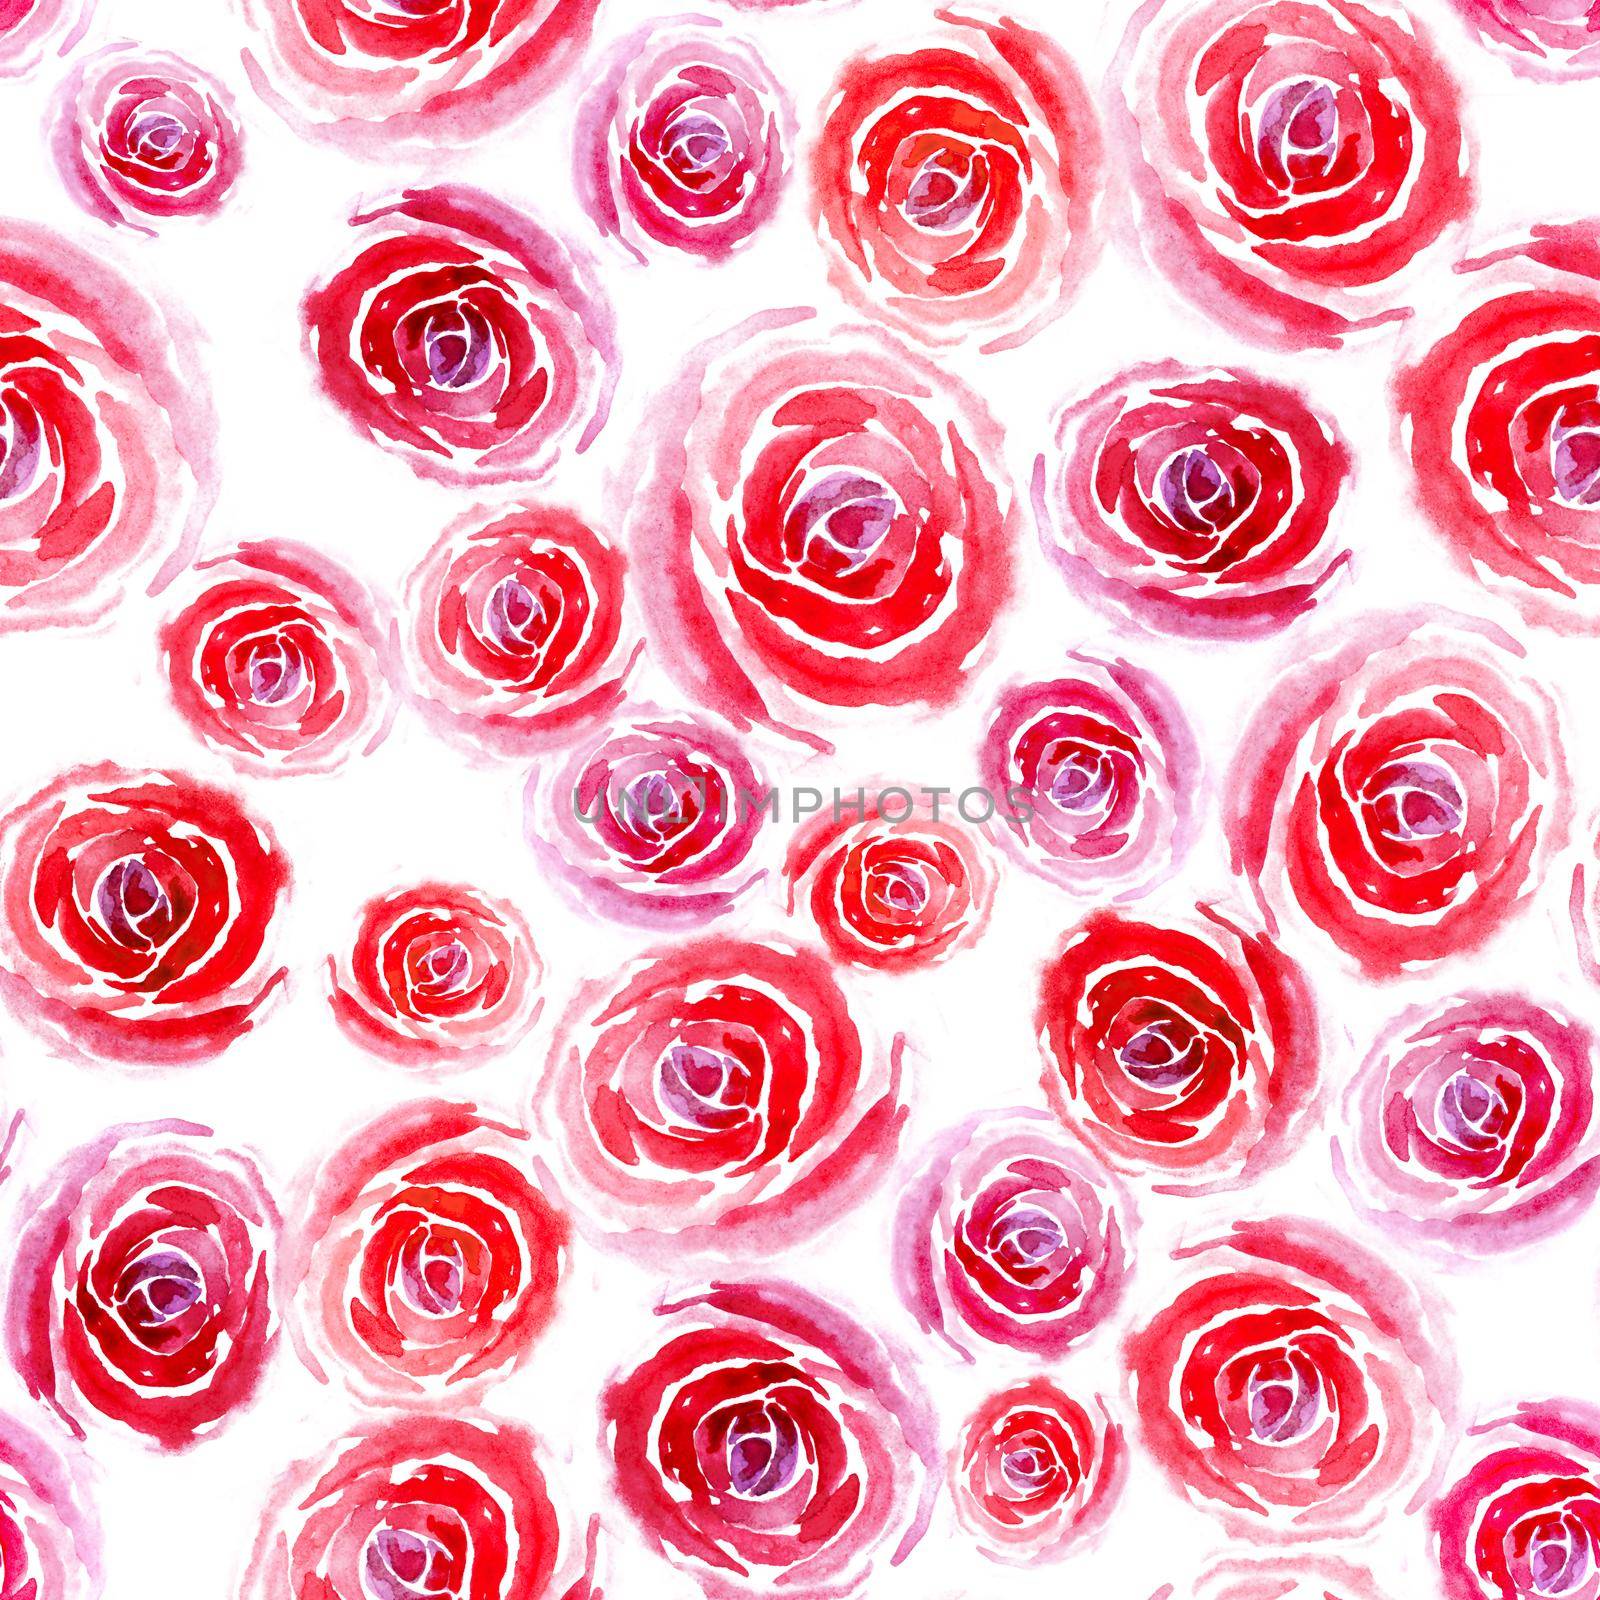 Seamless pattern of watercolor pink and red roses of different sizes on a white background by LanaLeta